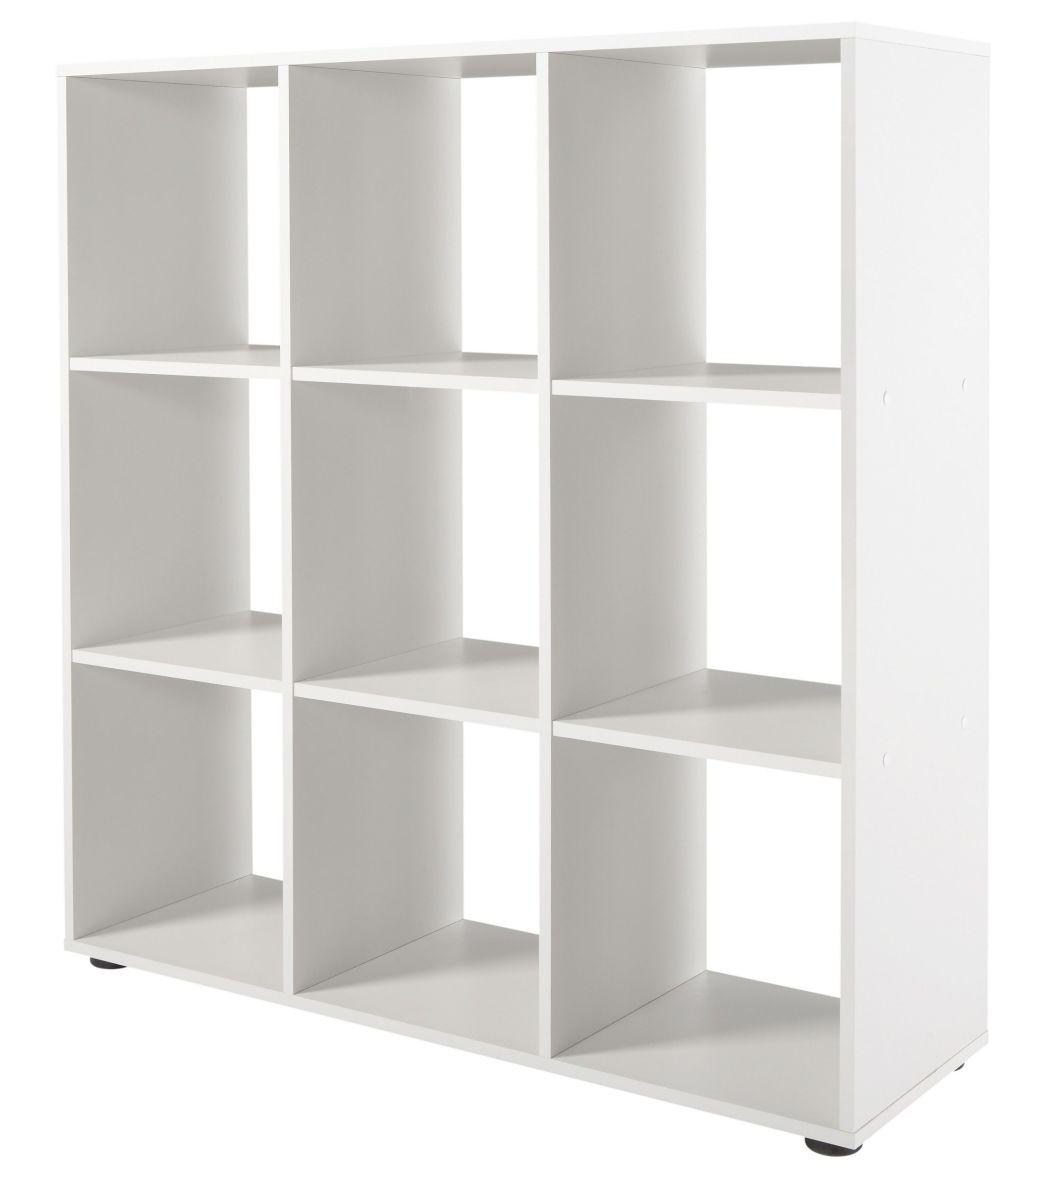 Modern 3 Tiers Wooden Bookshelf, Free Standing White Bookcase for Home